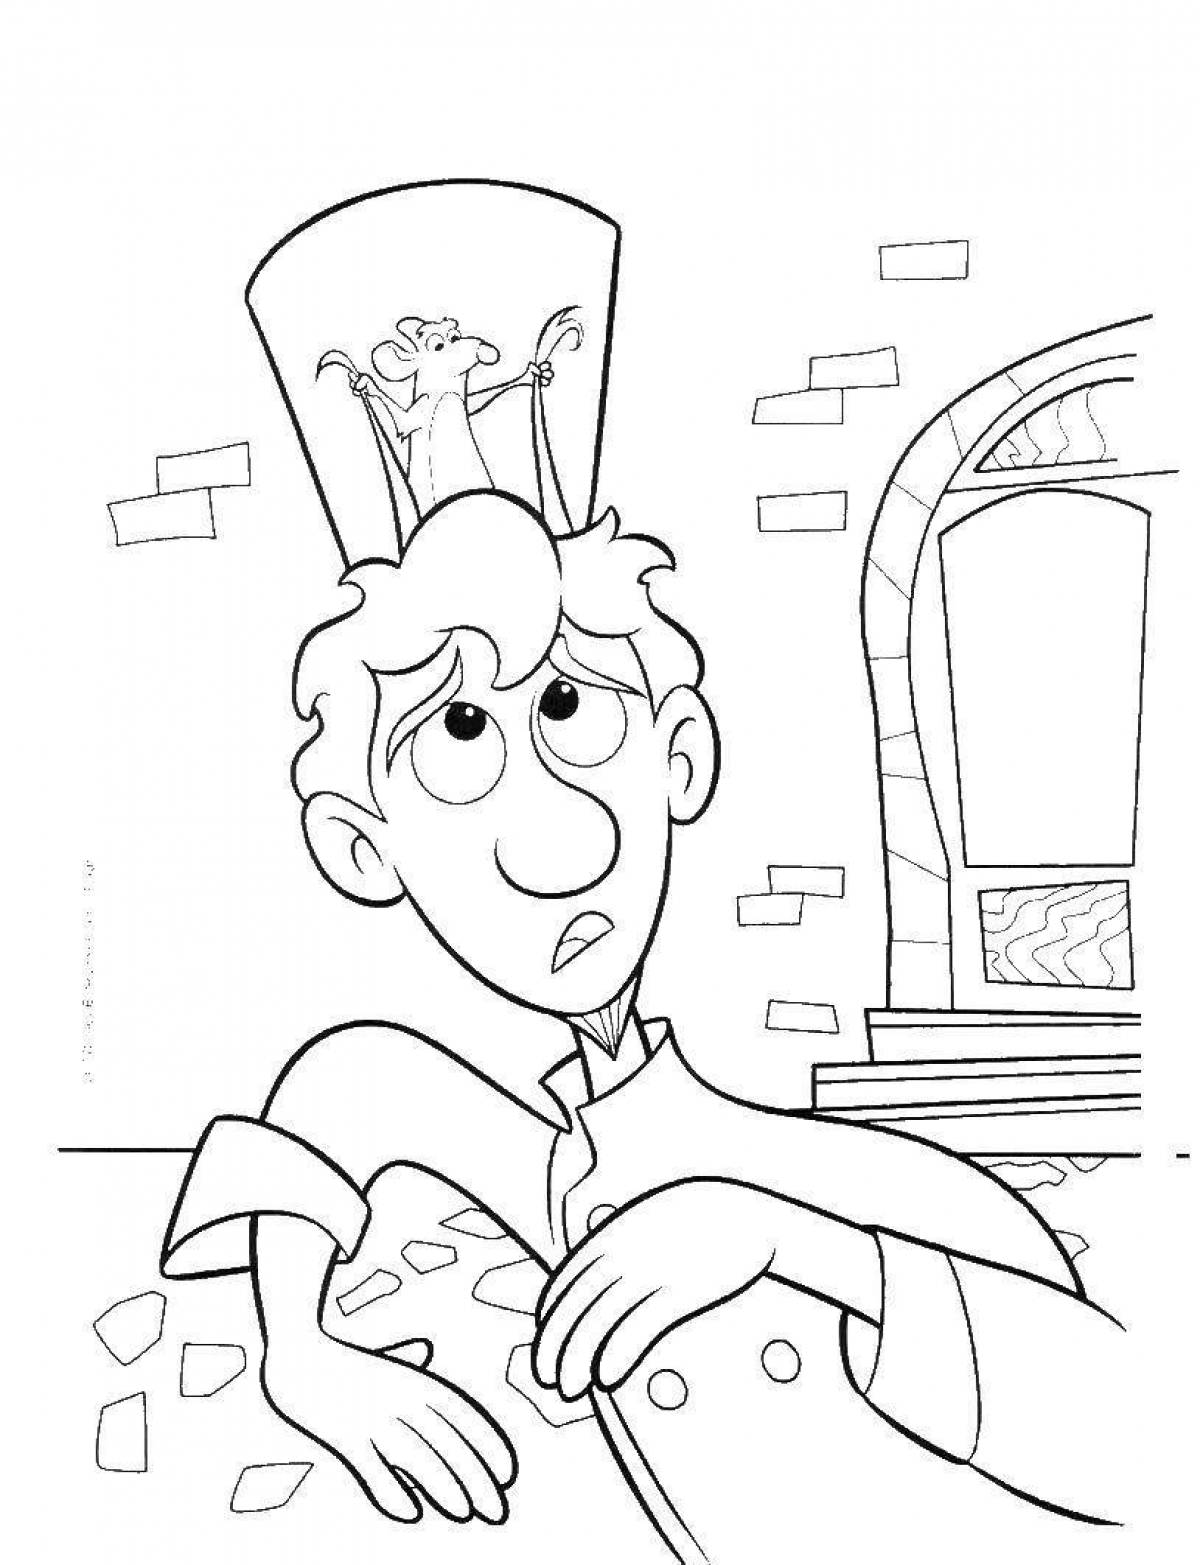 Coloring page charming ratatouille